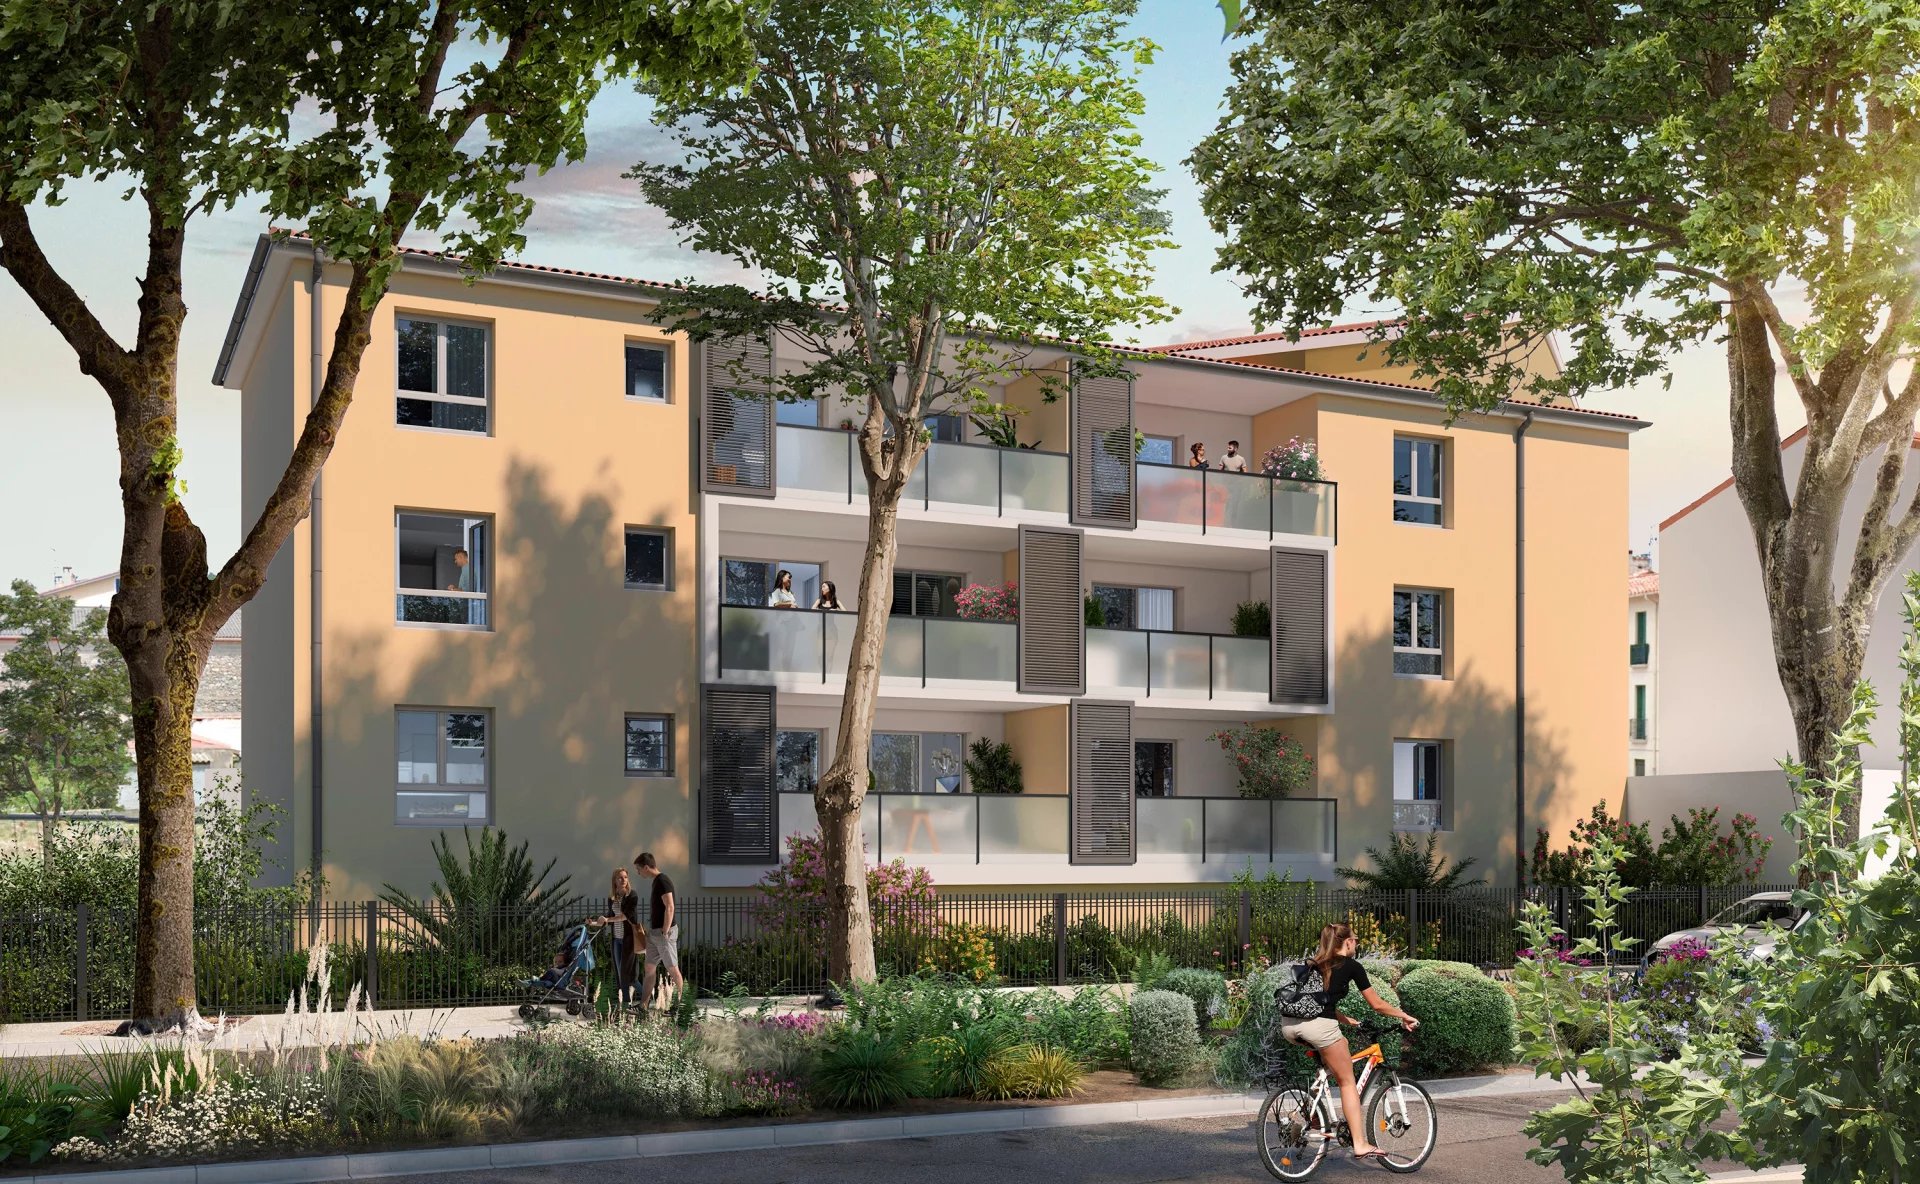 OFF-PLAN 3-BED APPARTMENT (LOT 401), RESIDENCE L'ANGLE DES ARTS, CERET